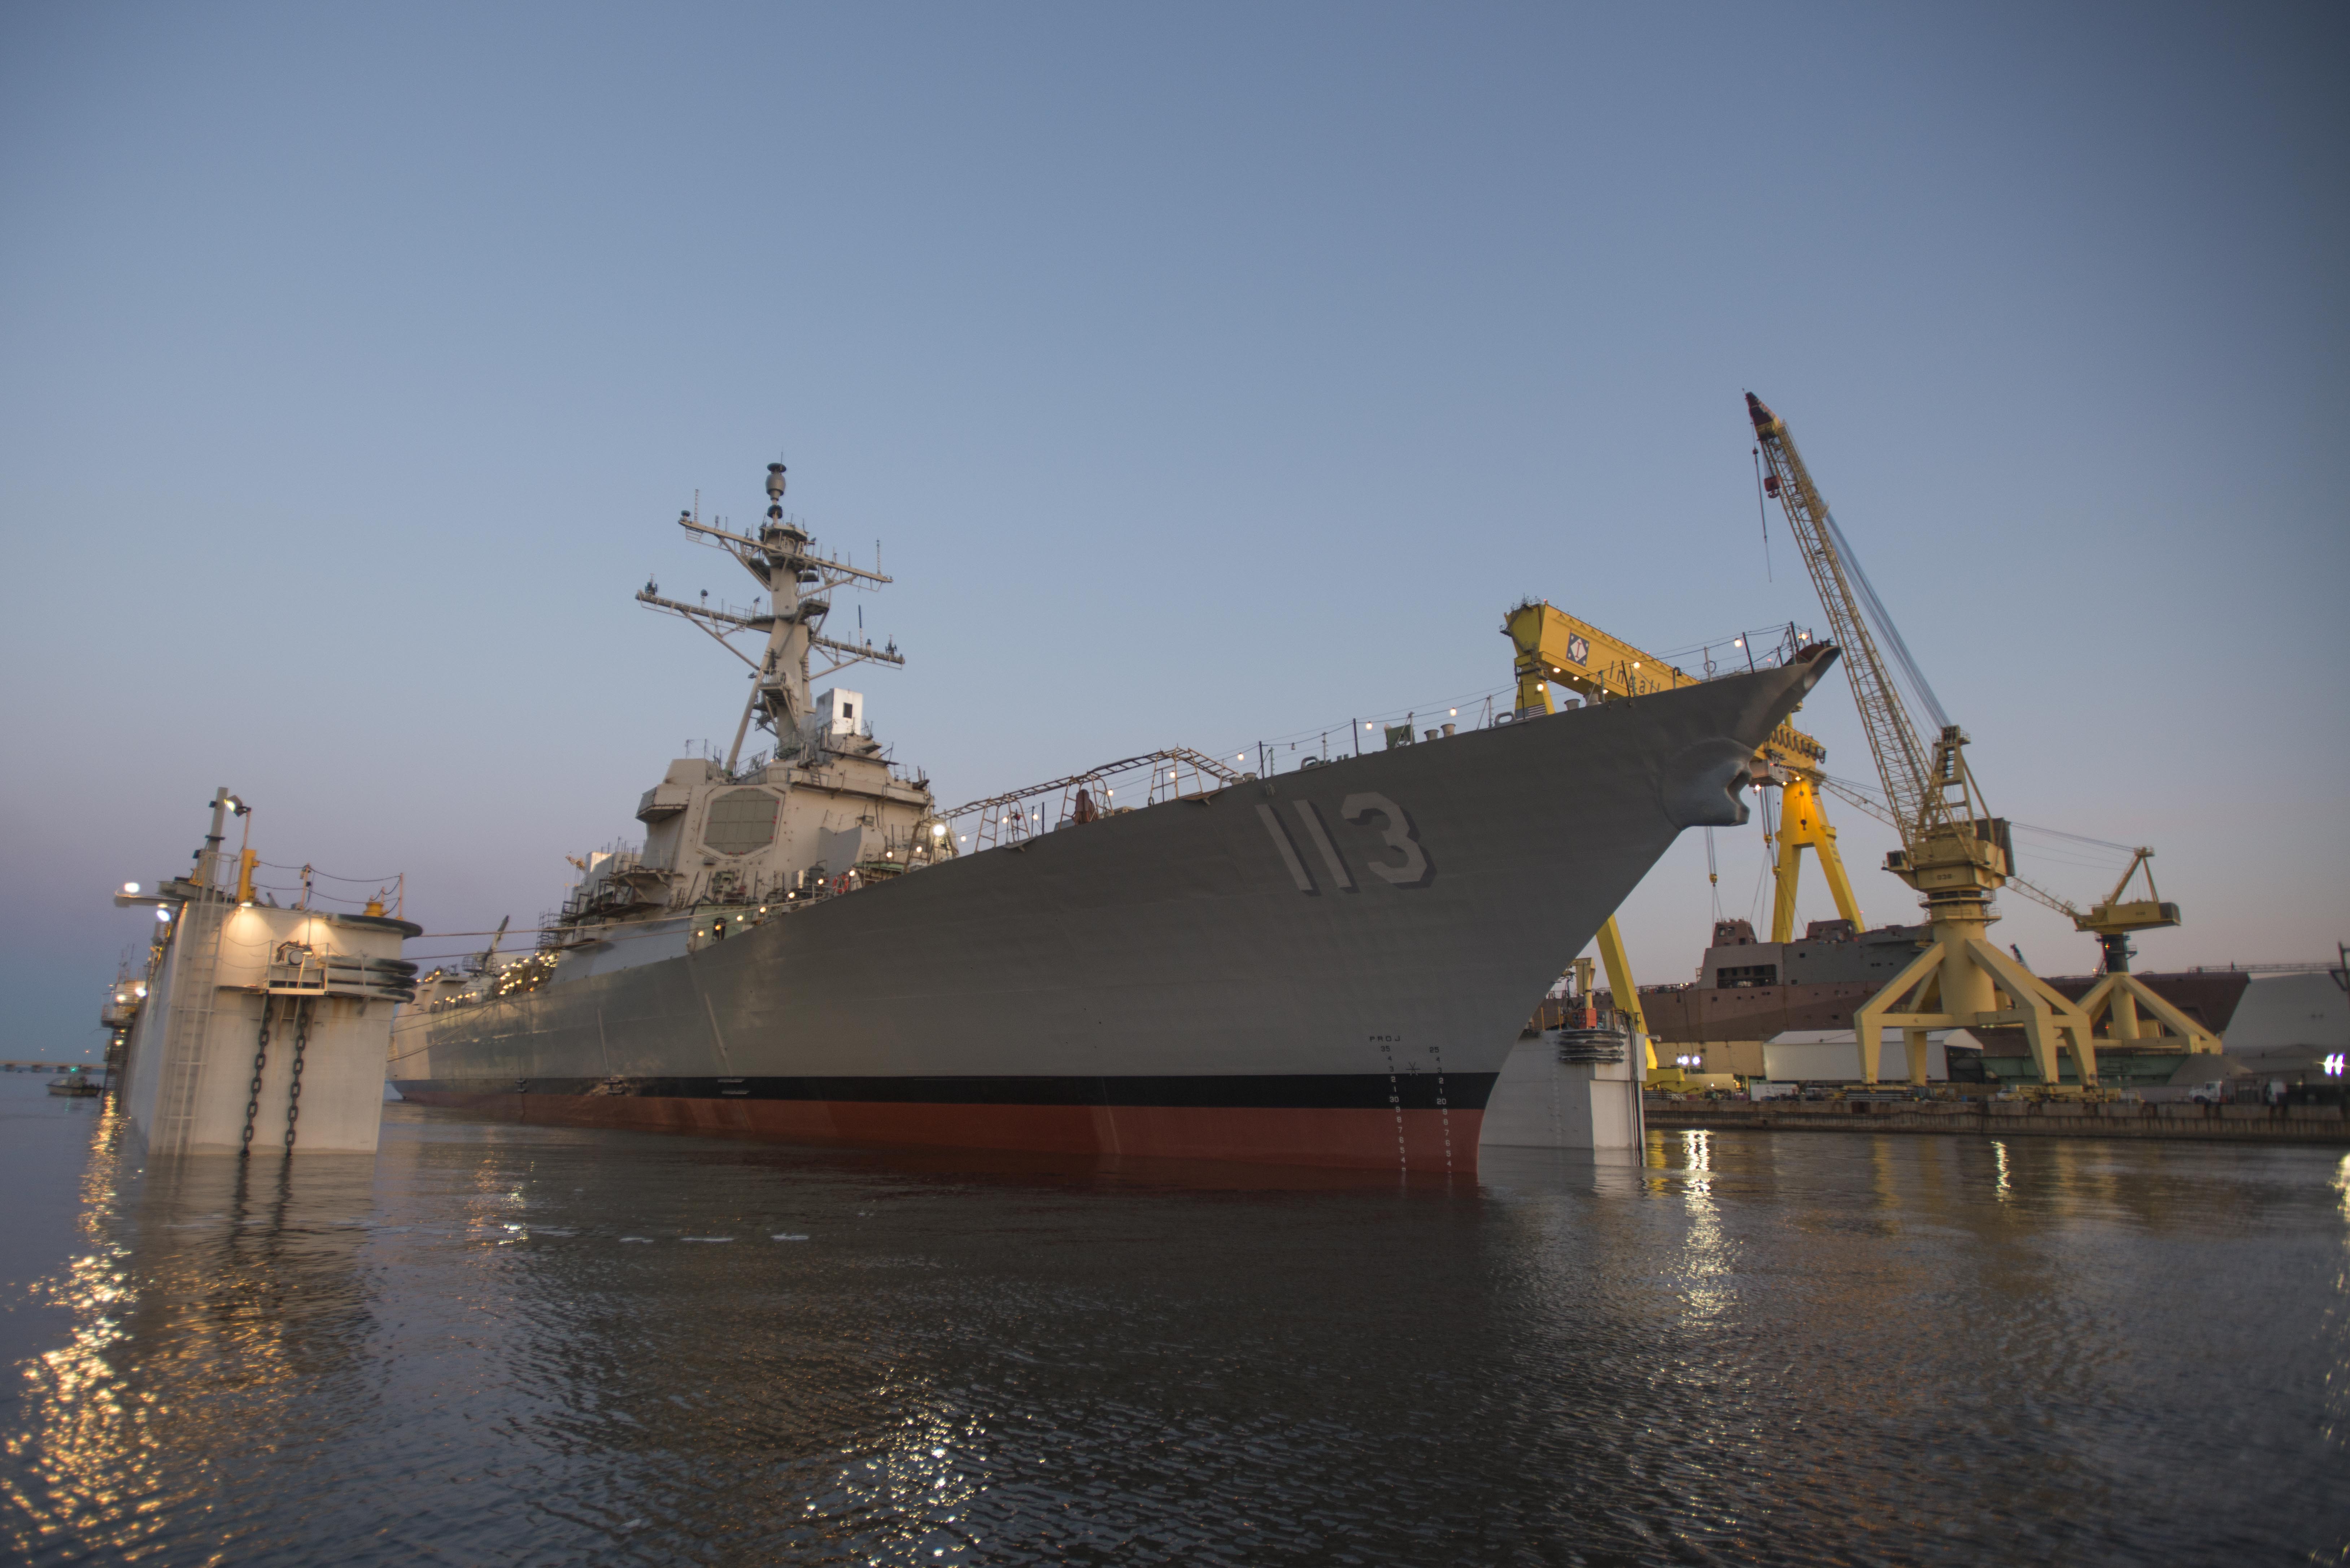 Guided missile destroyer John Finn (DDG-113) in March 2015. US Navy Photo